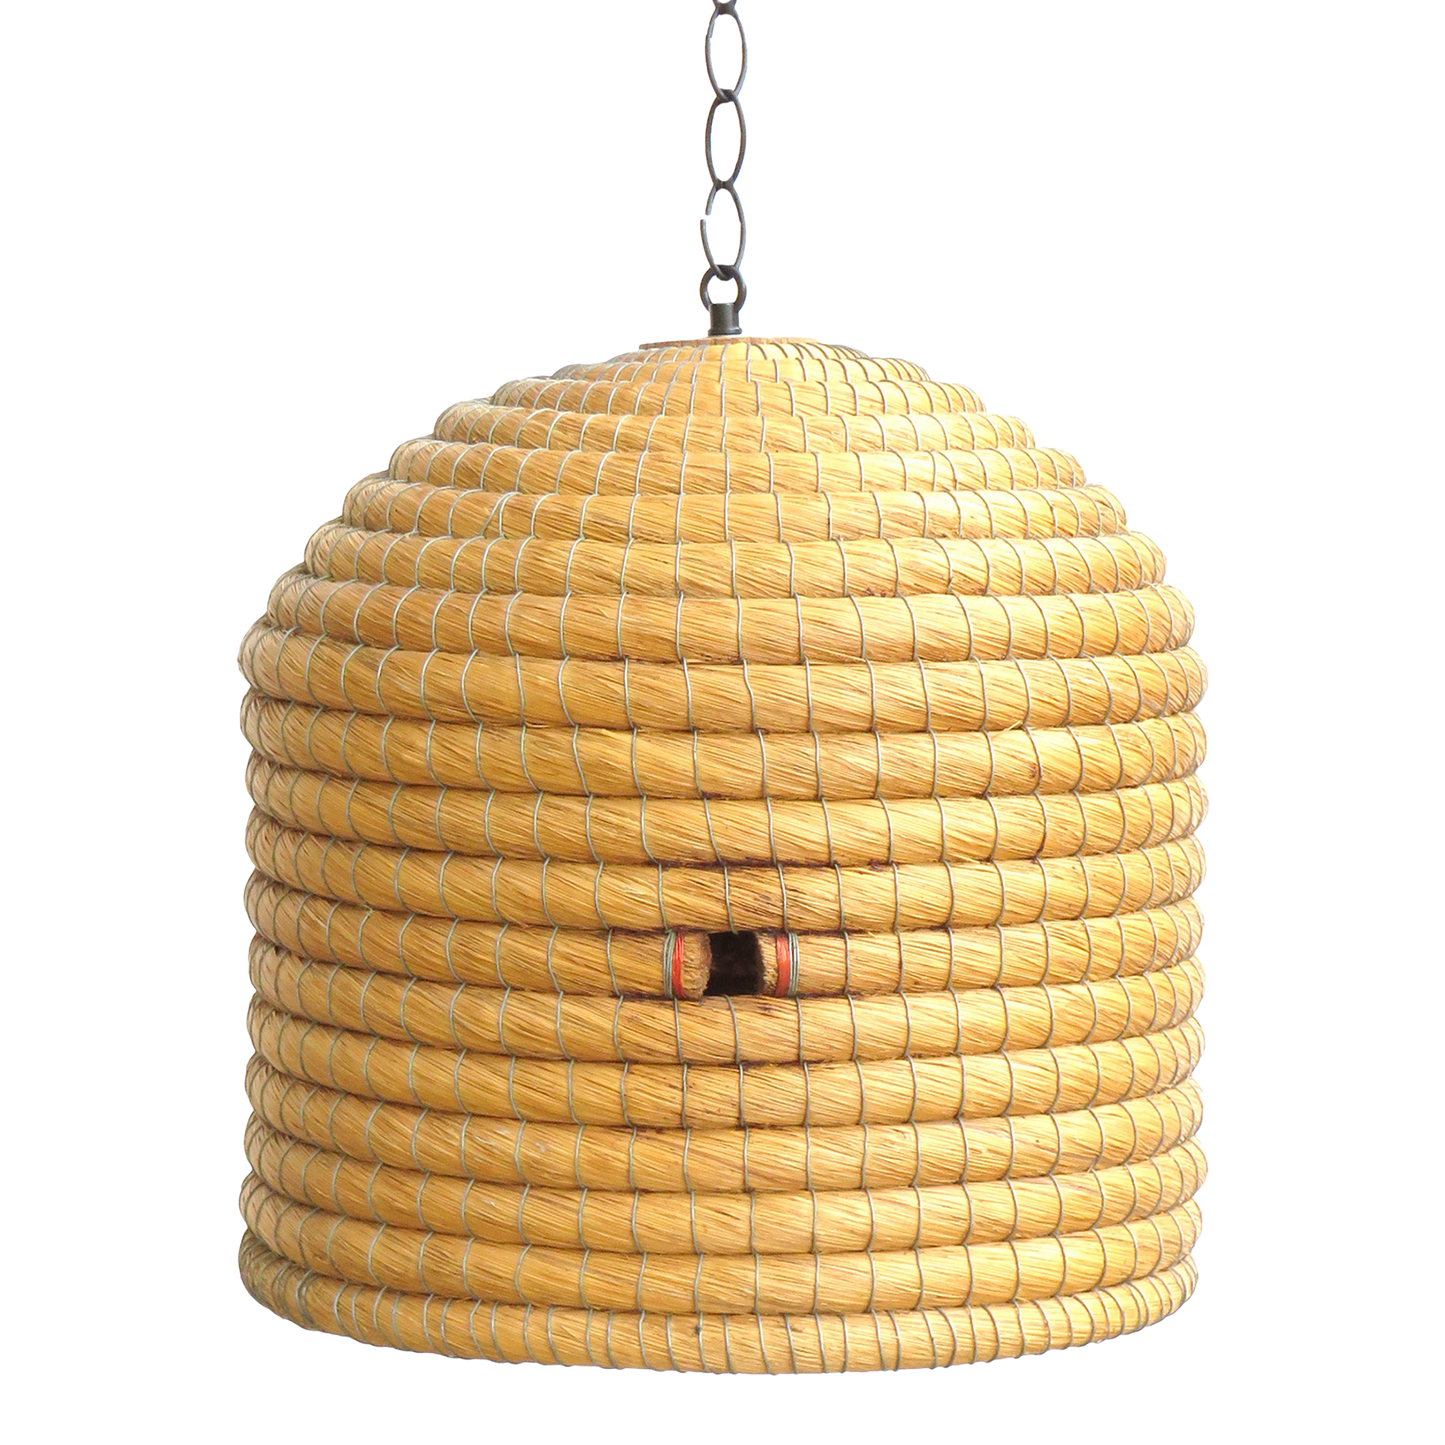 French Beehive / Skep Hanging Pendant Light Fixture